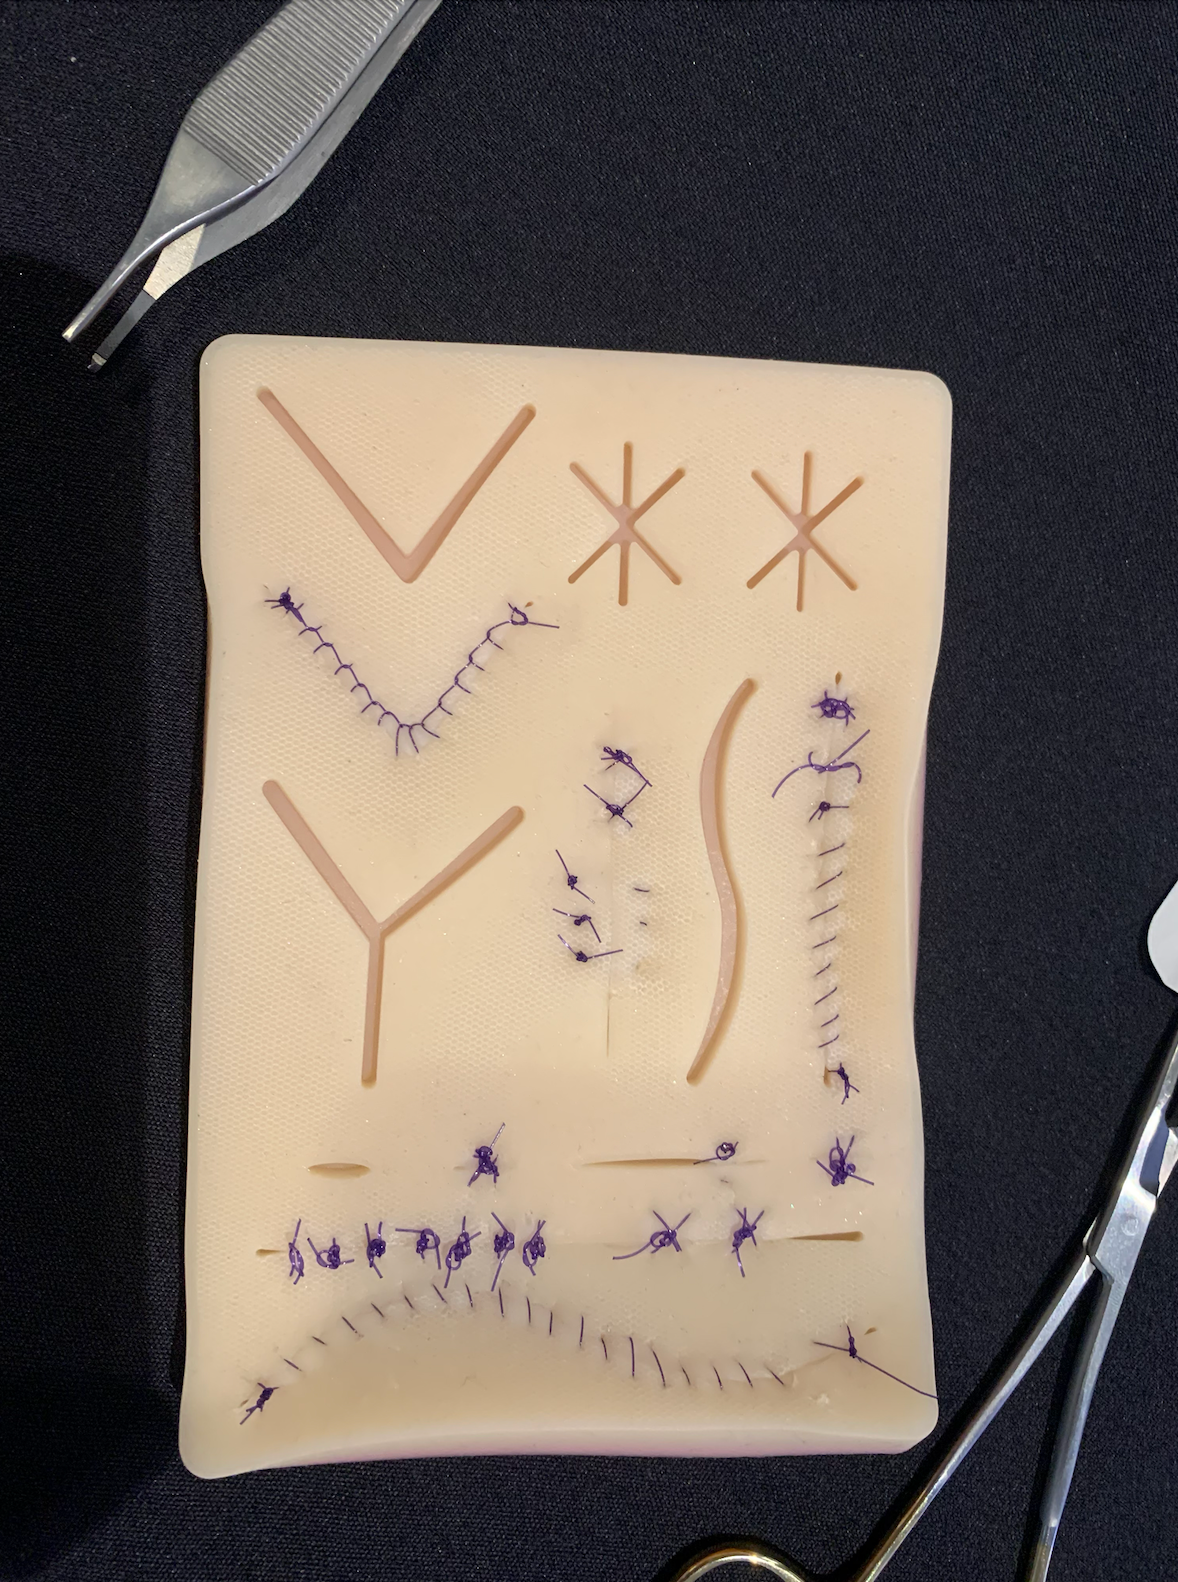 Suture practice on a model skin pad during a suture lab